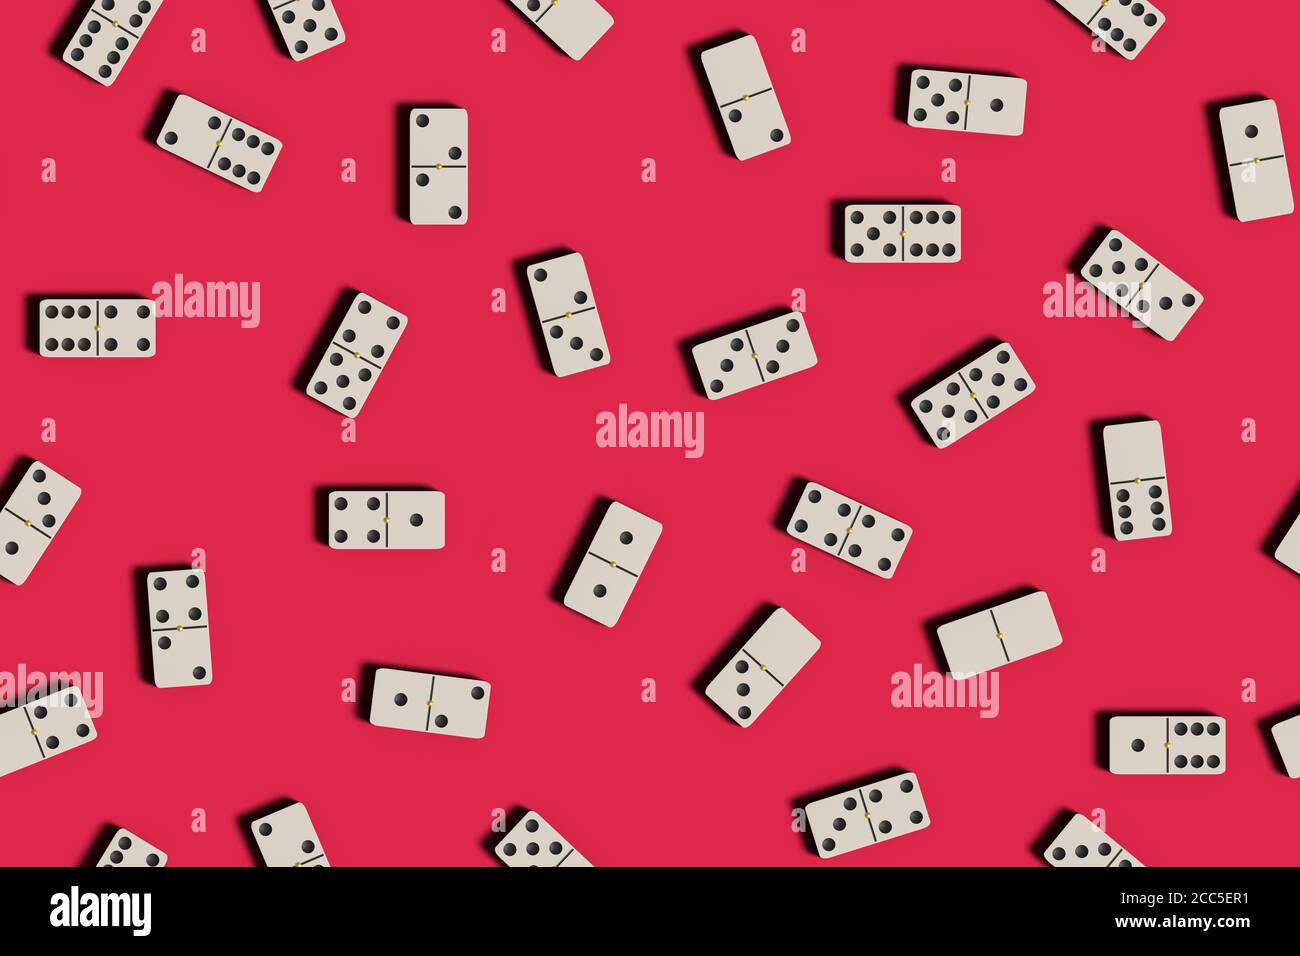 Domino tiles on a red background. Seamless pattern. 3d illustration. Stock Photo